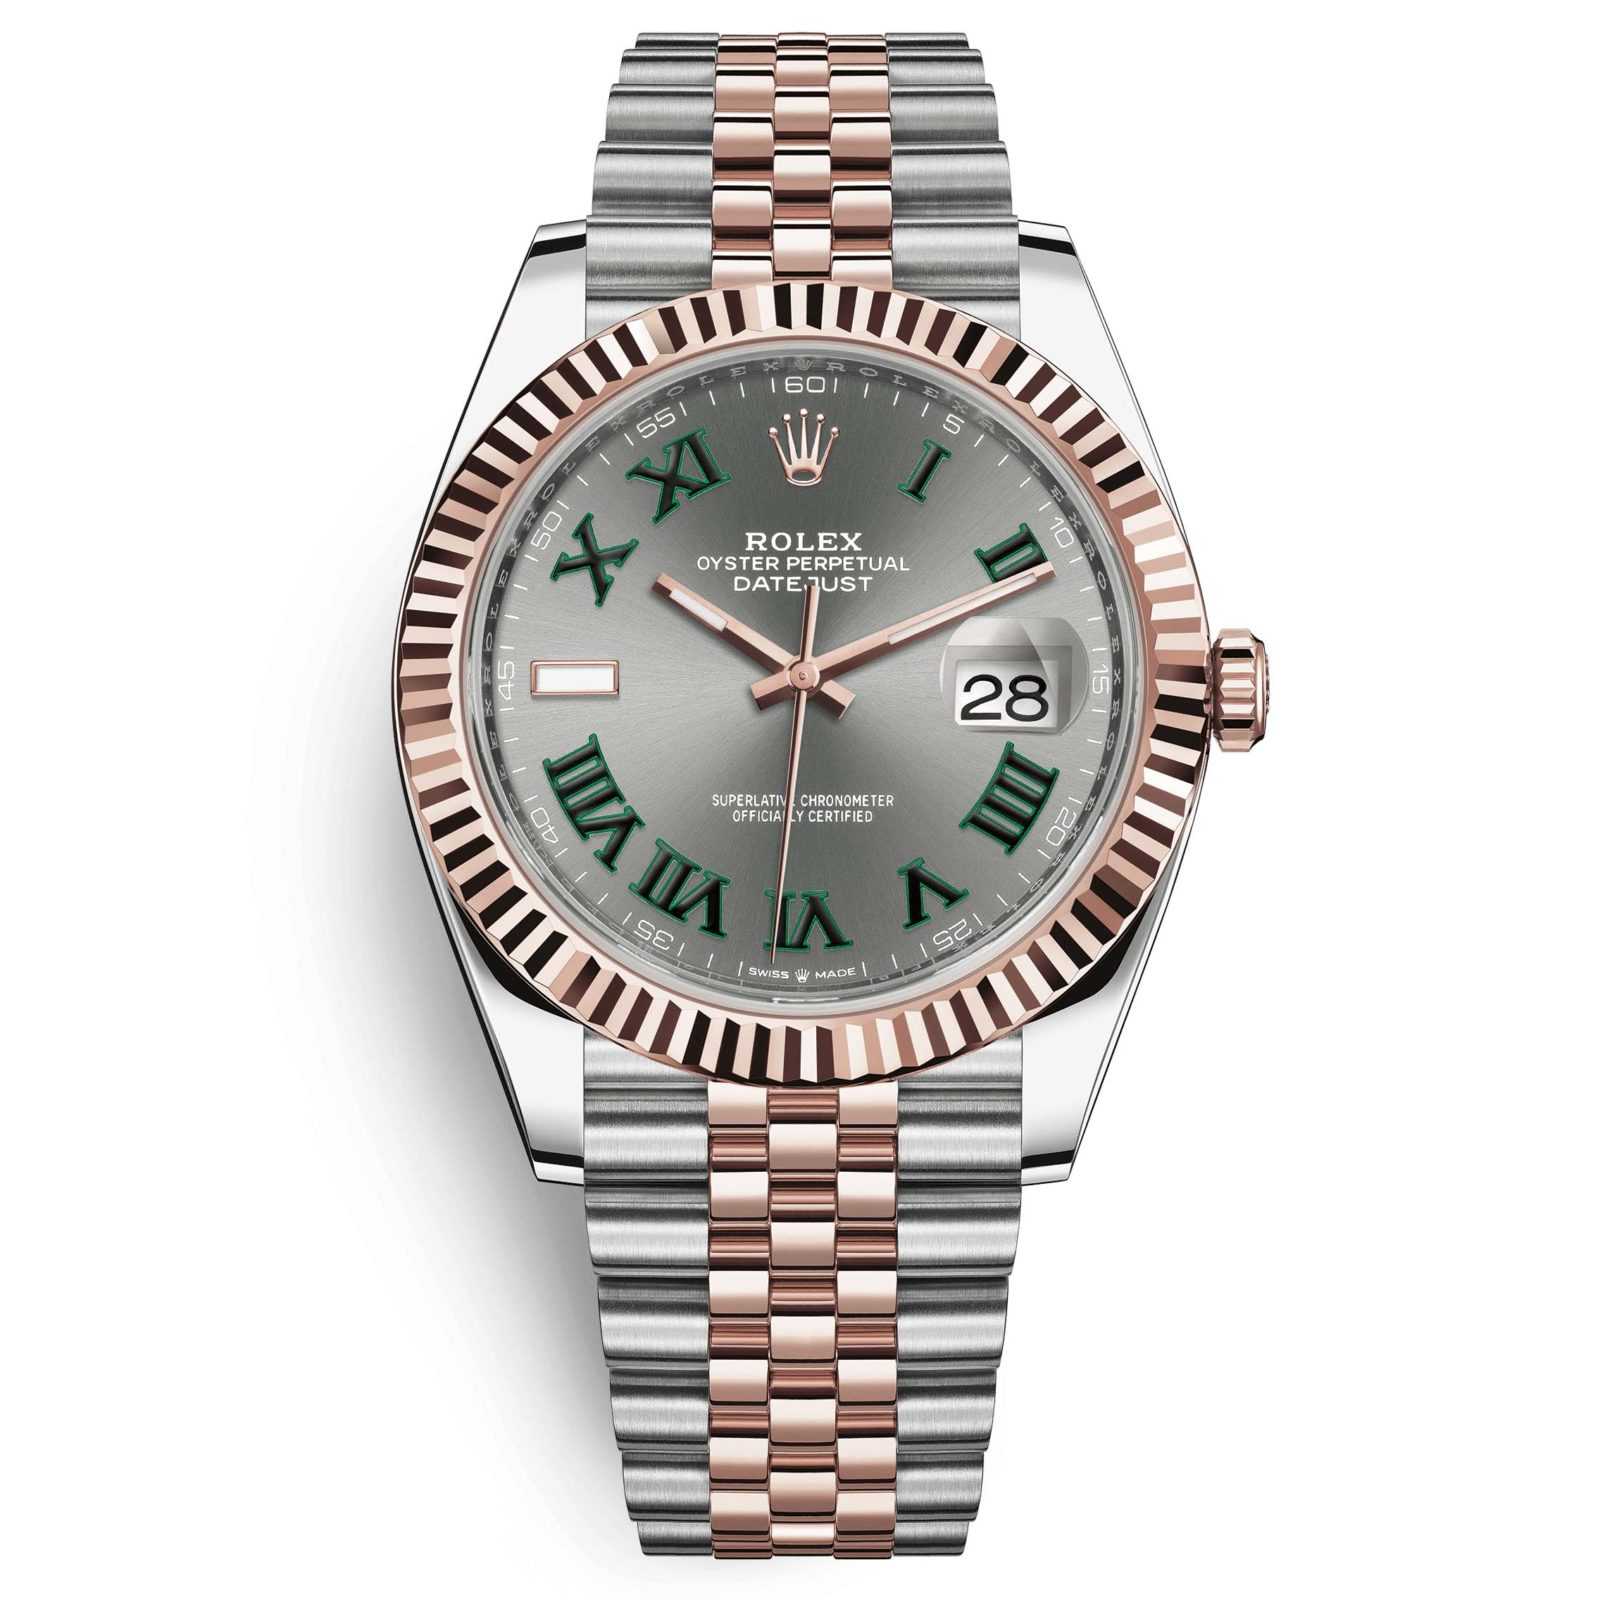 Rolex Datejust 41 Oyster Perpetual Rose Gold Steel Grey Dial | lupon.gov.ph